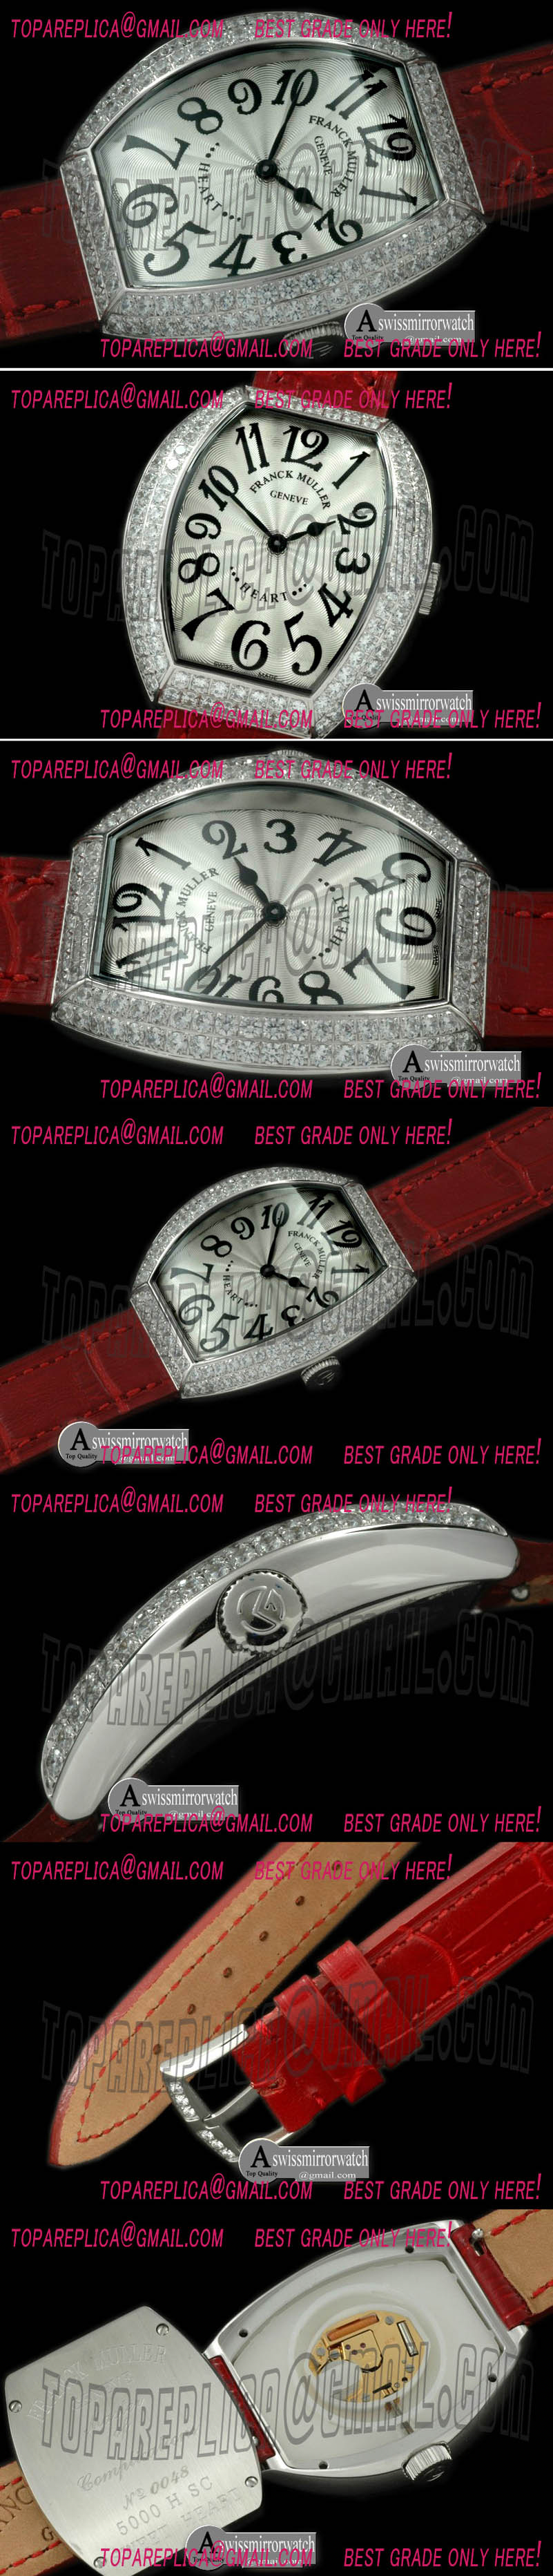 Replica Franck Muller Master Square Watches